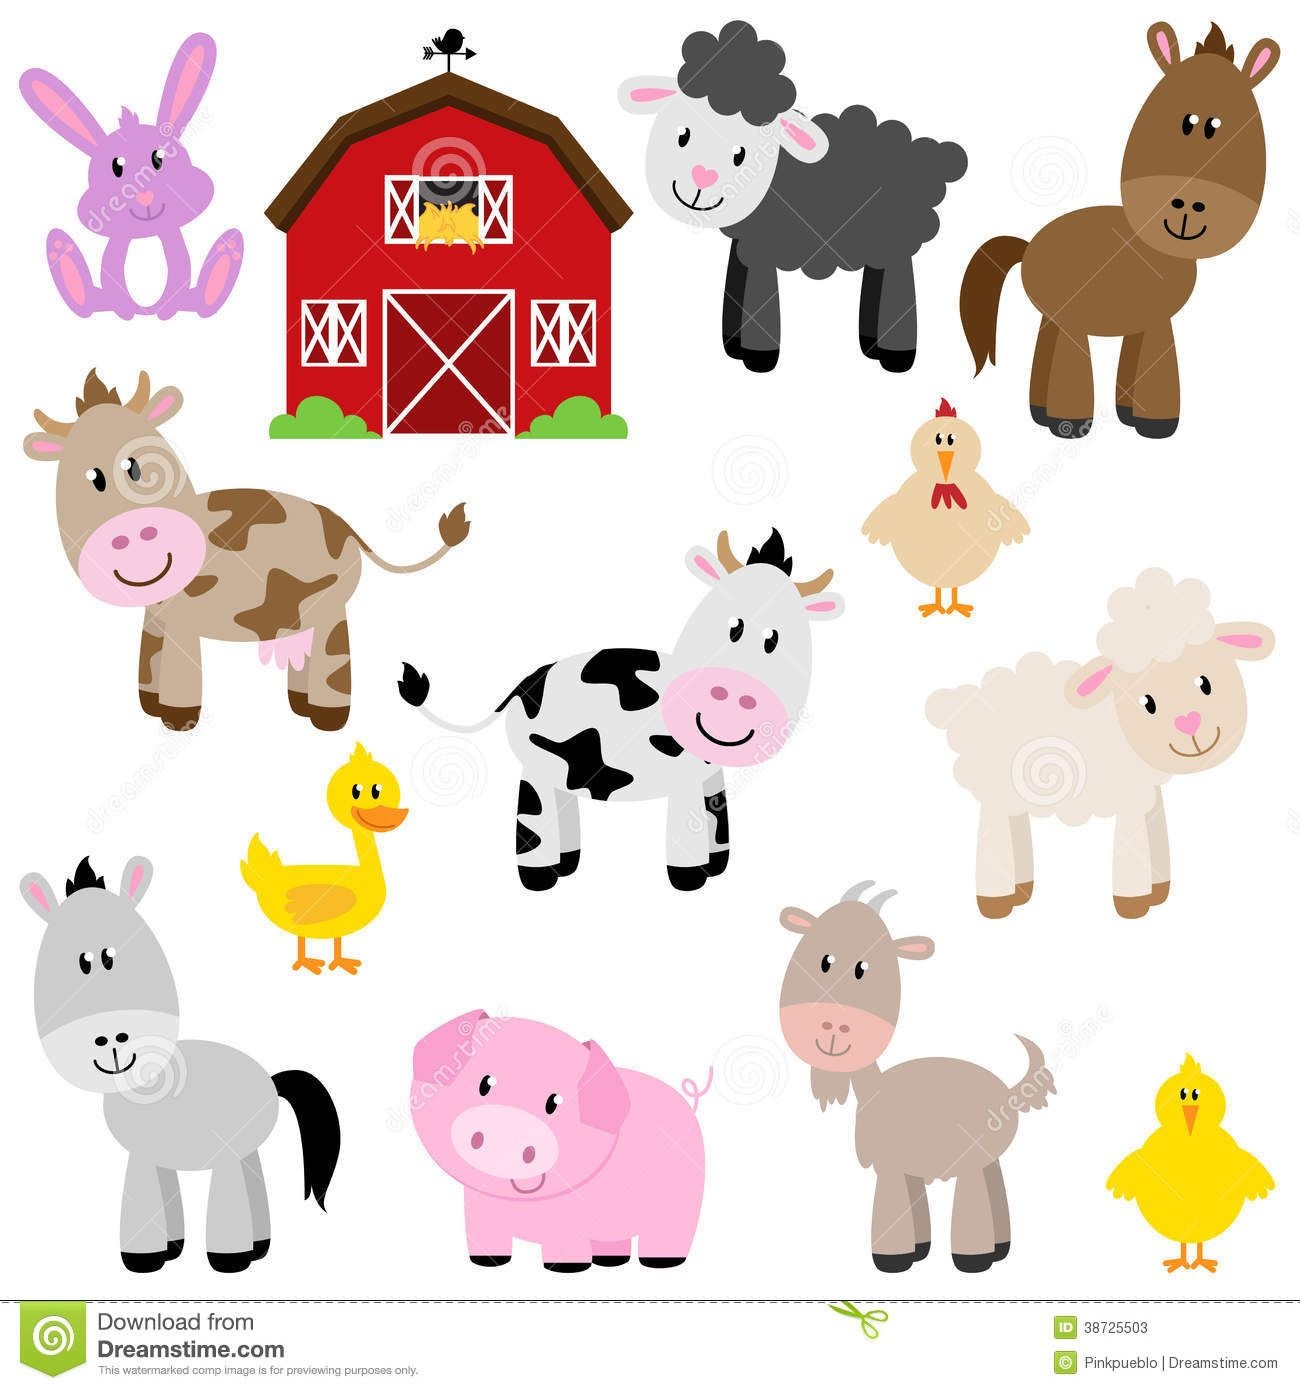 Vector Collection Of Cute Cartoon Farm Animals - Download From Over - Free Printable Farm Animal Cutouts